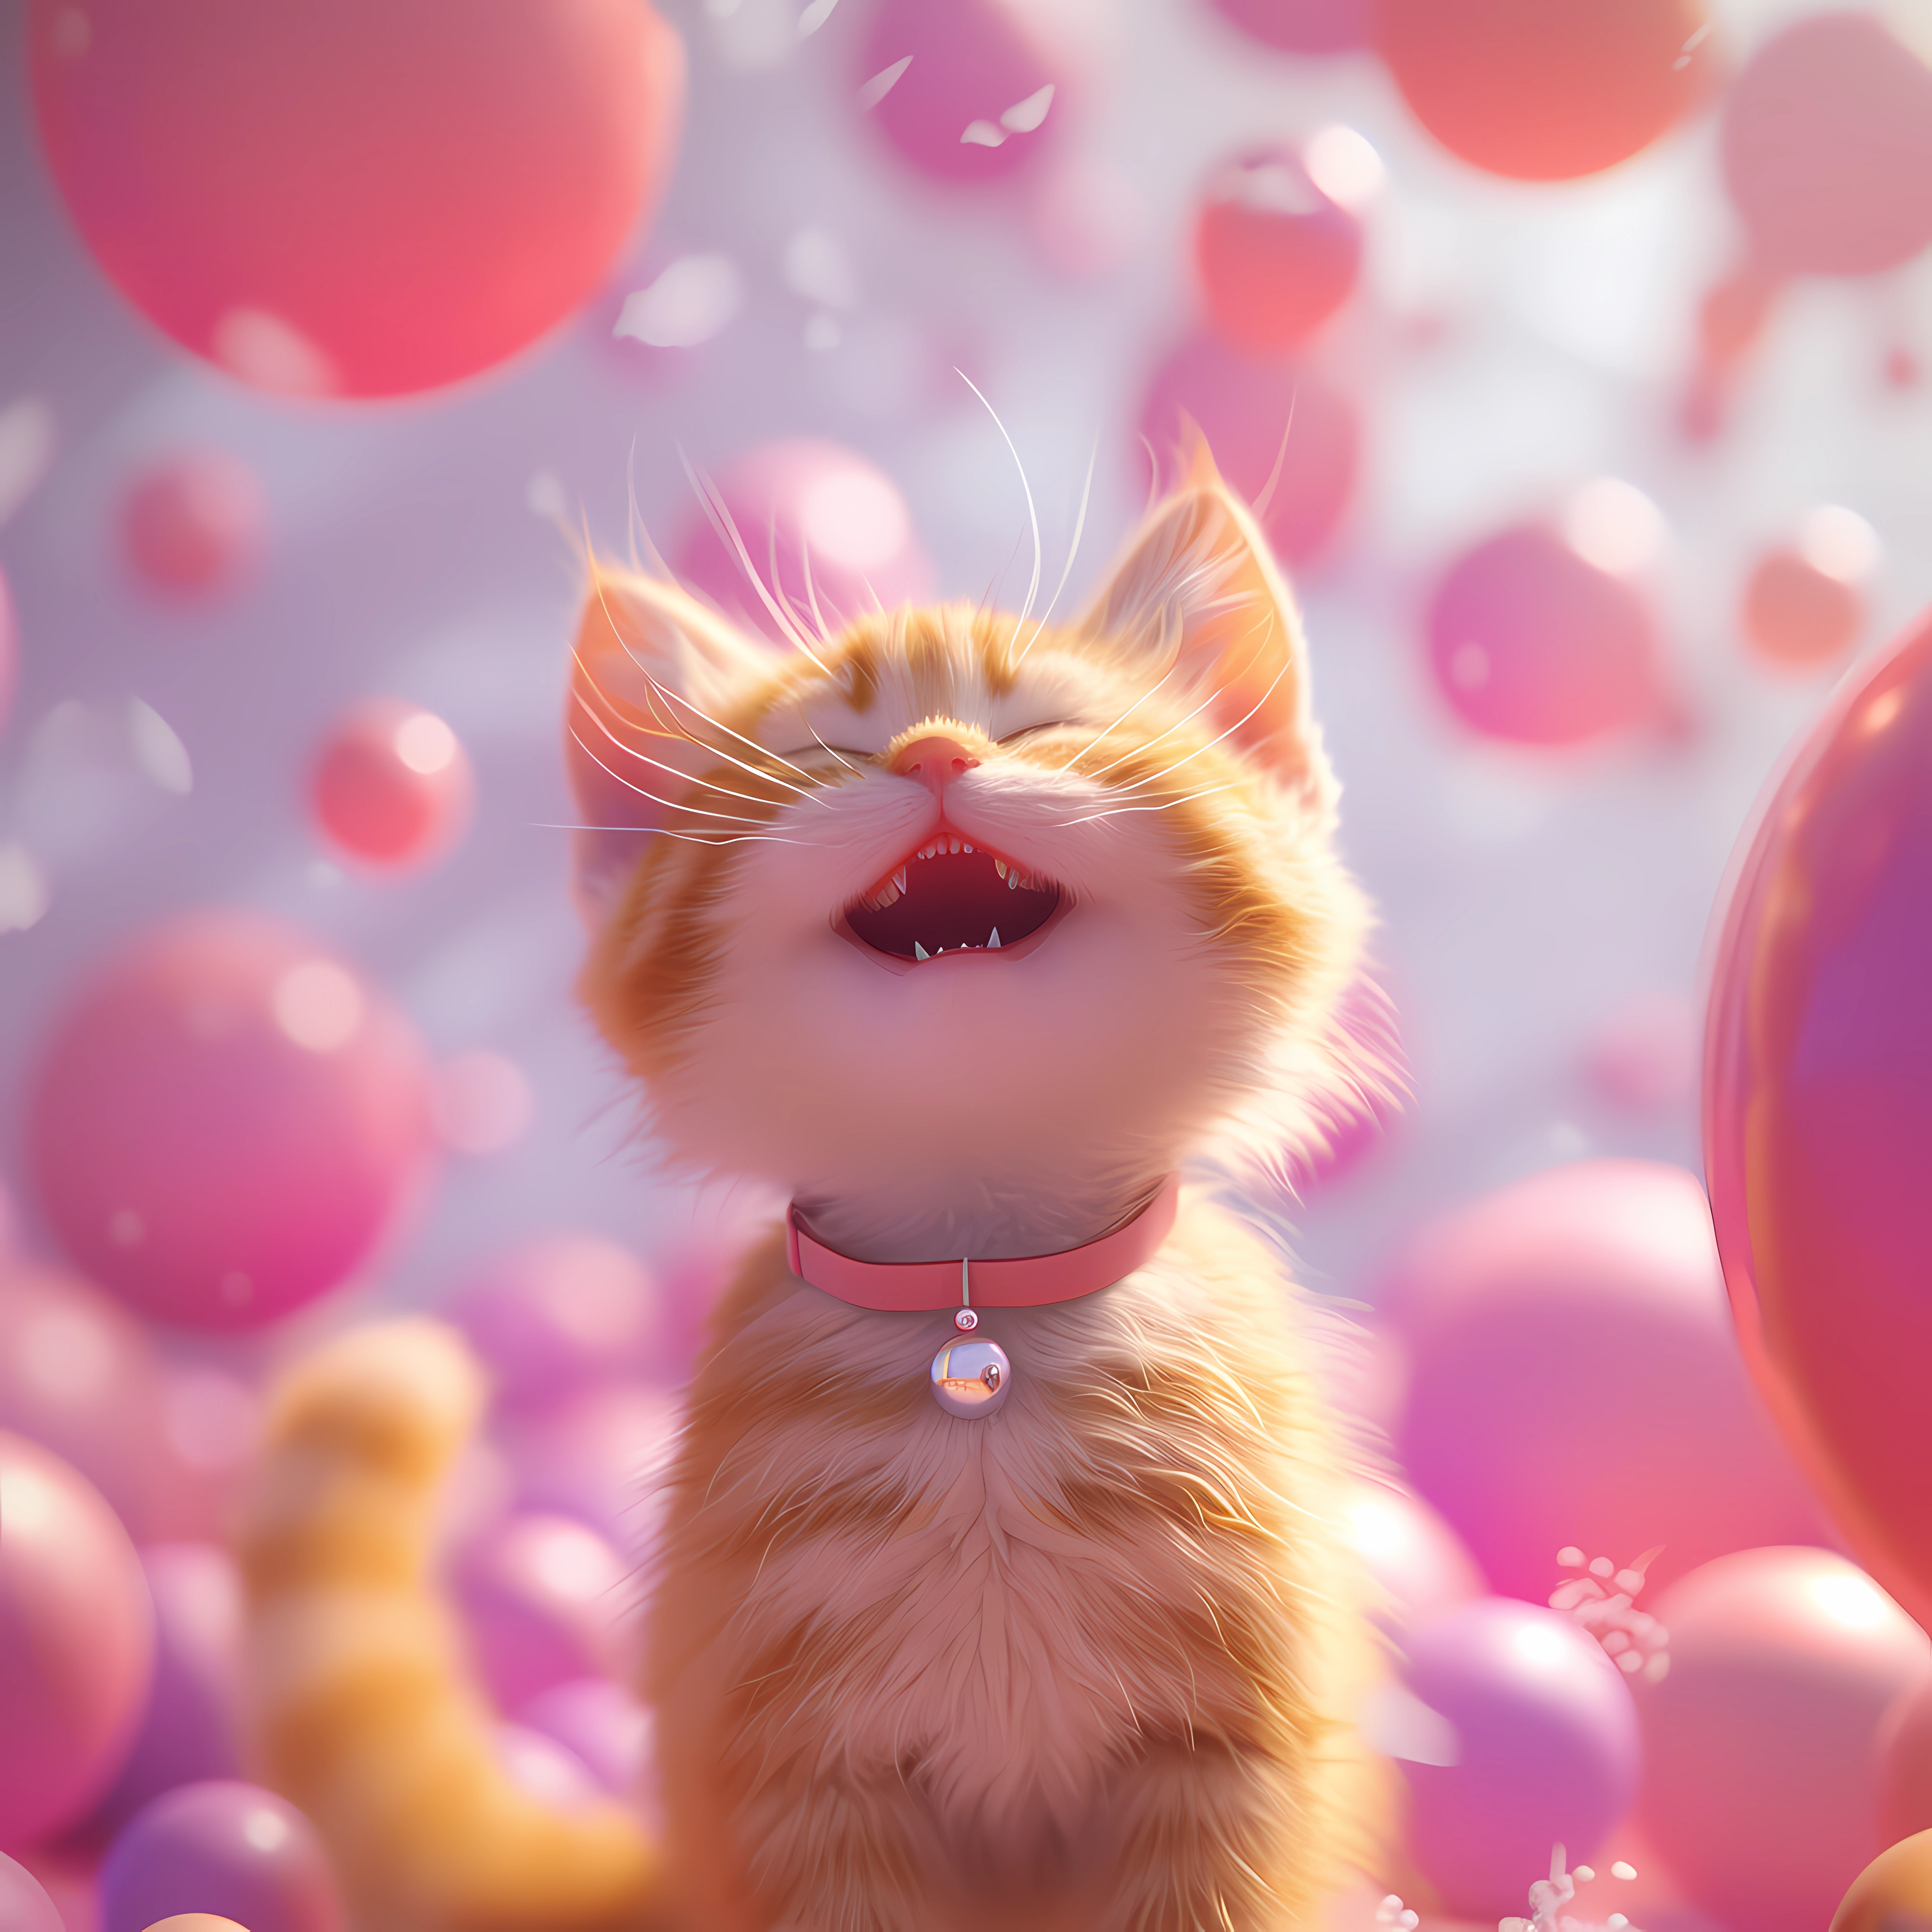 Joyful orange kitten with a cute expression surrounded by colorful balloons, perfect for an avatar or profile picture.